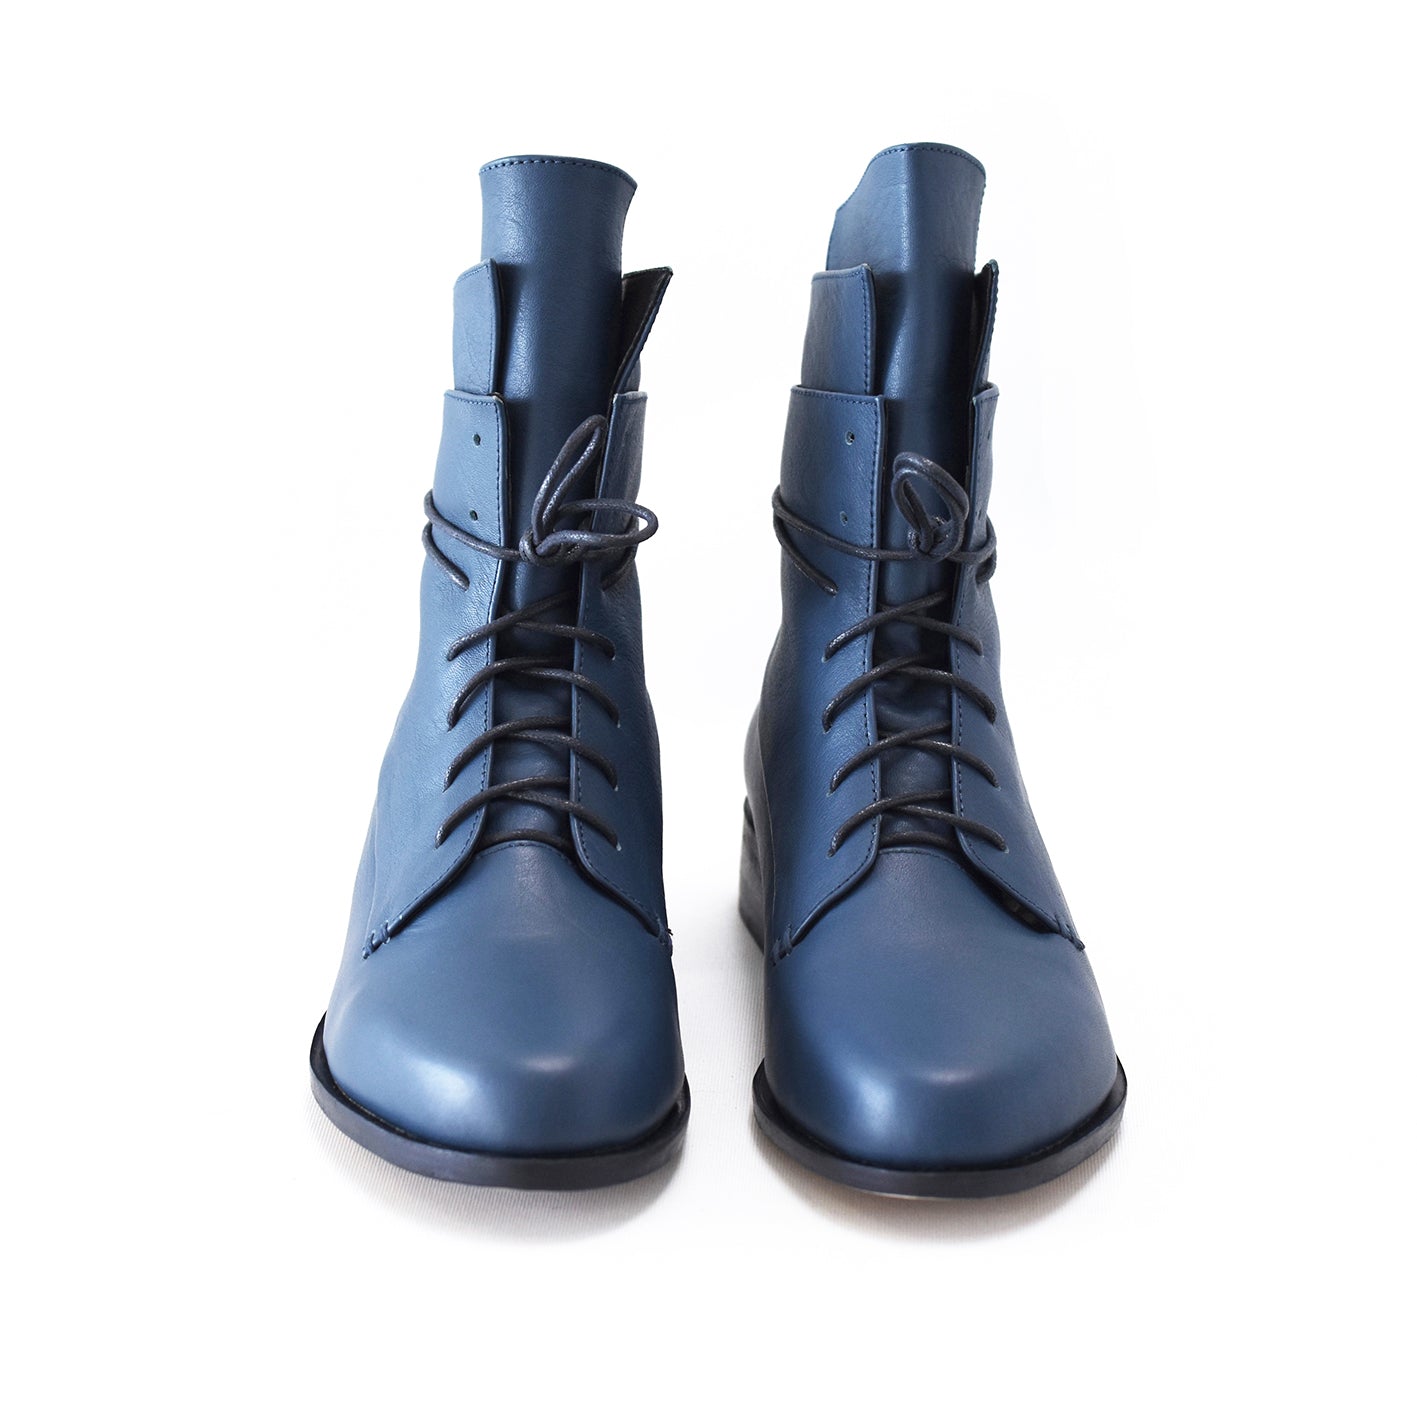 The Striker Boot Saxe Blue, Edgy multilayered design for flattering angle